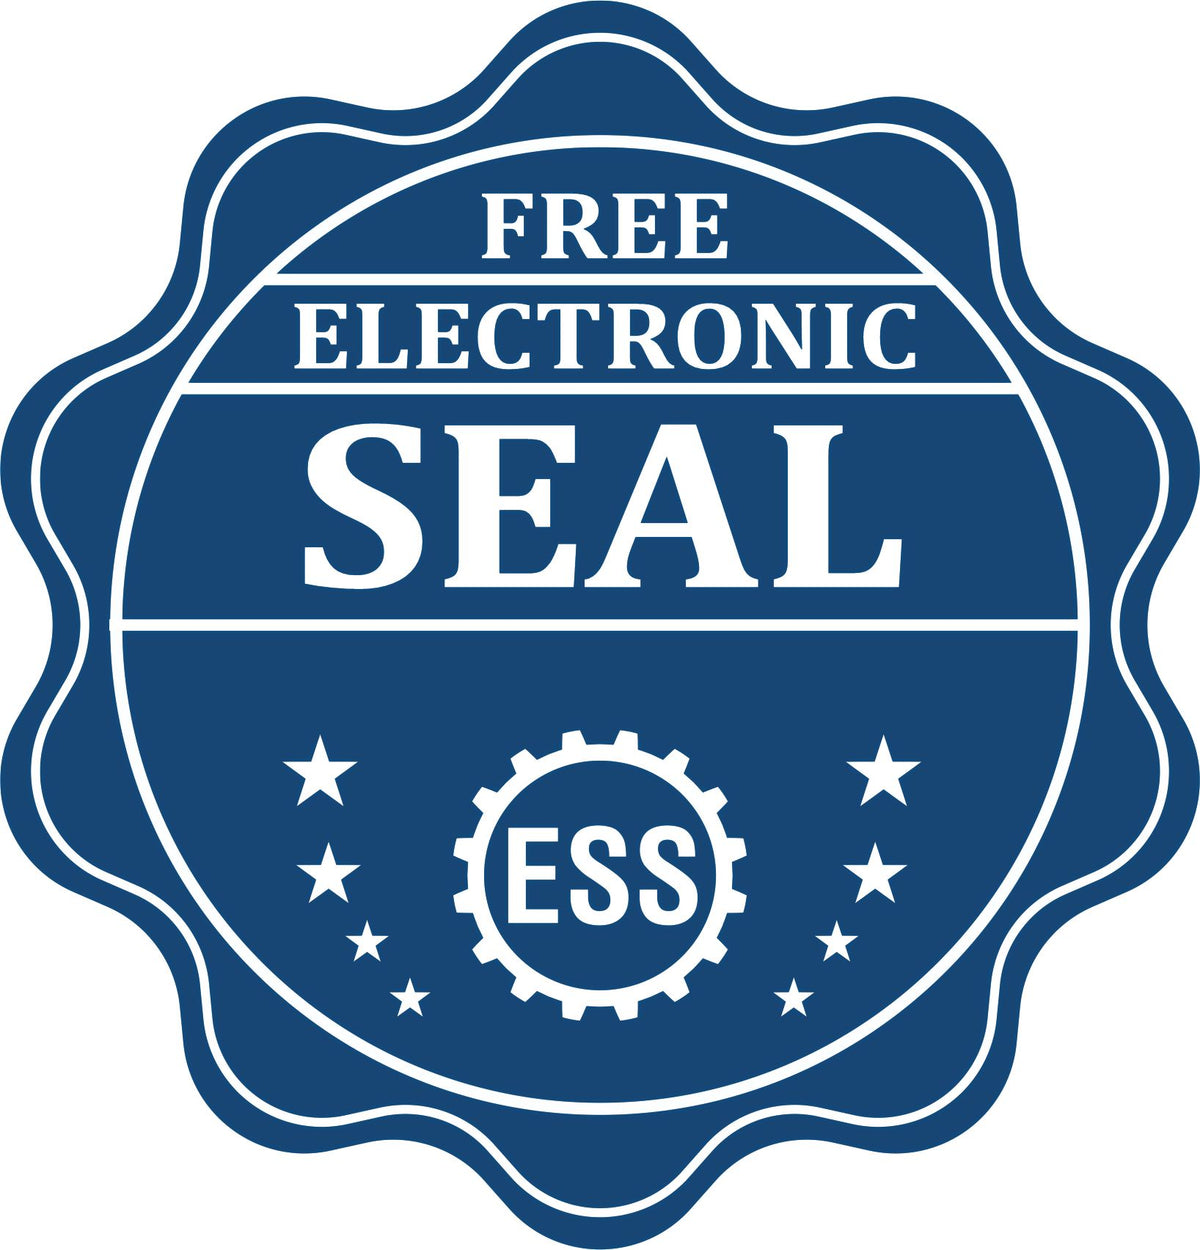 A badge showing a free electronic seal for the Wooden Handle Louisiana State Seal Notary Public Stamp with stars and the ESS gear on the emblem.